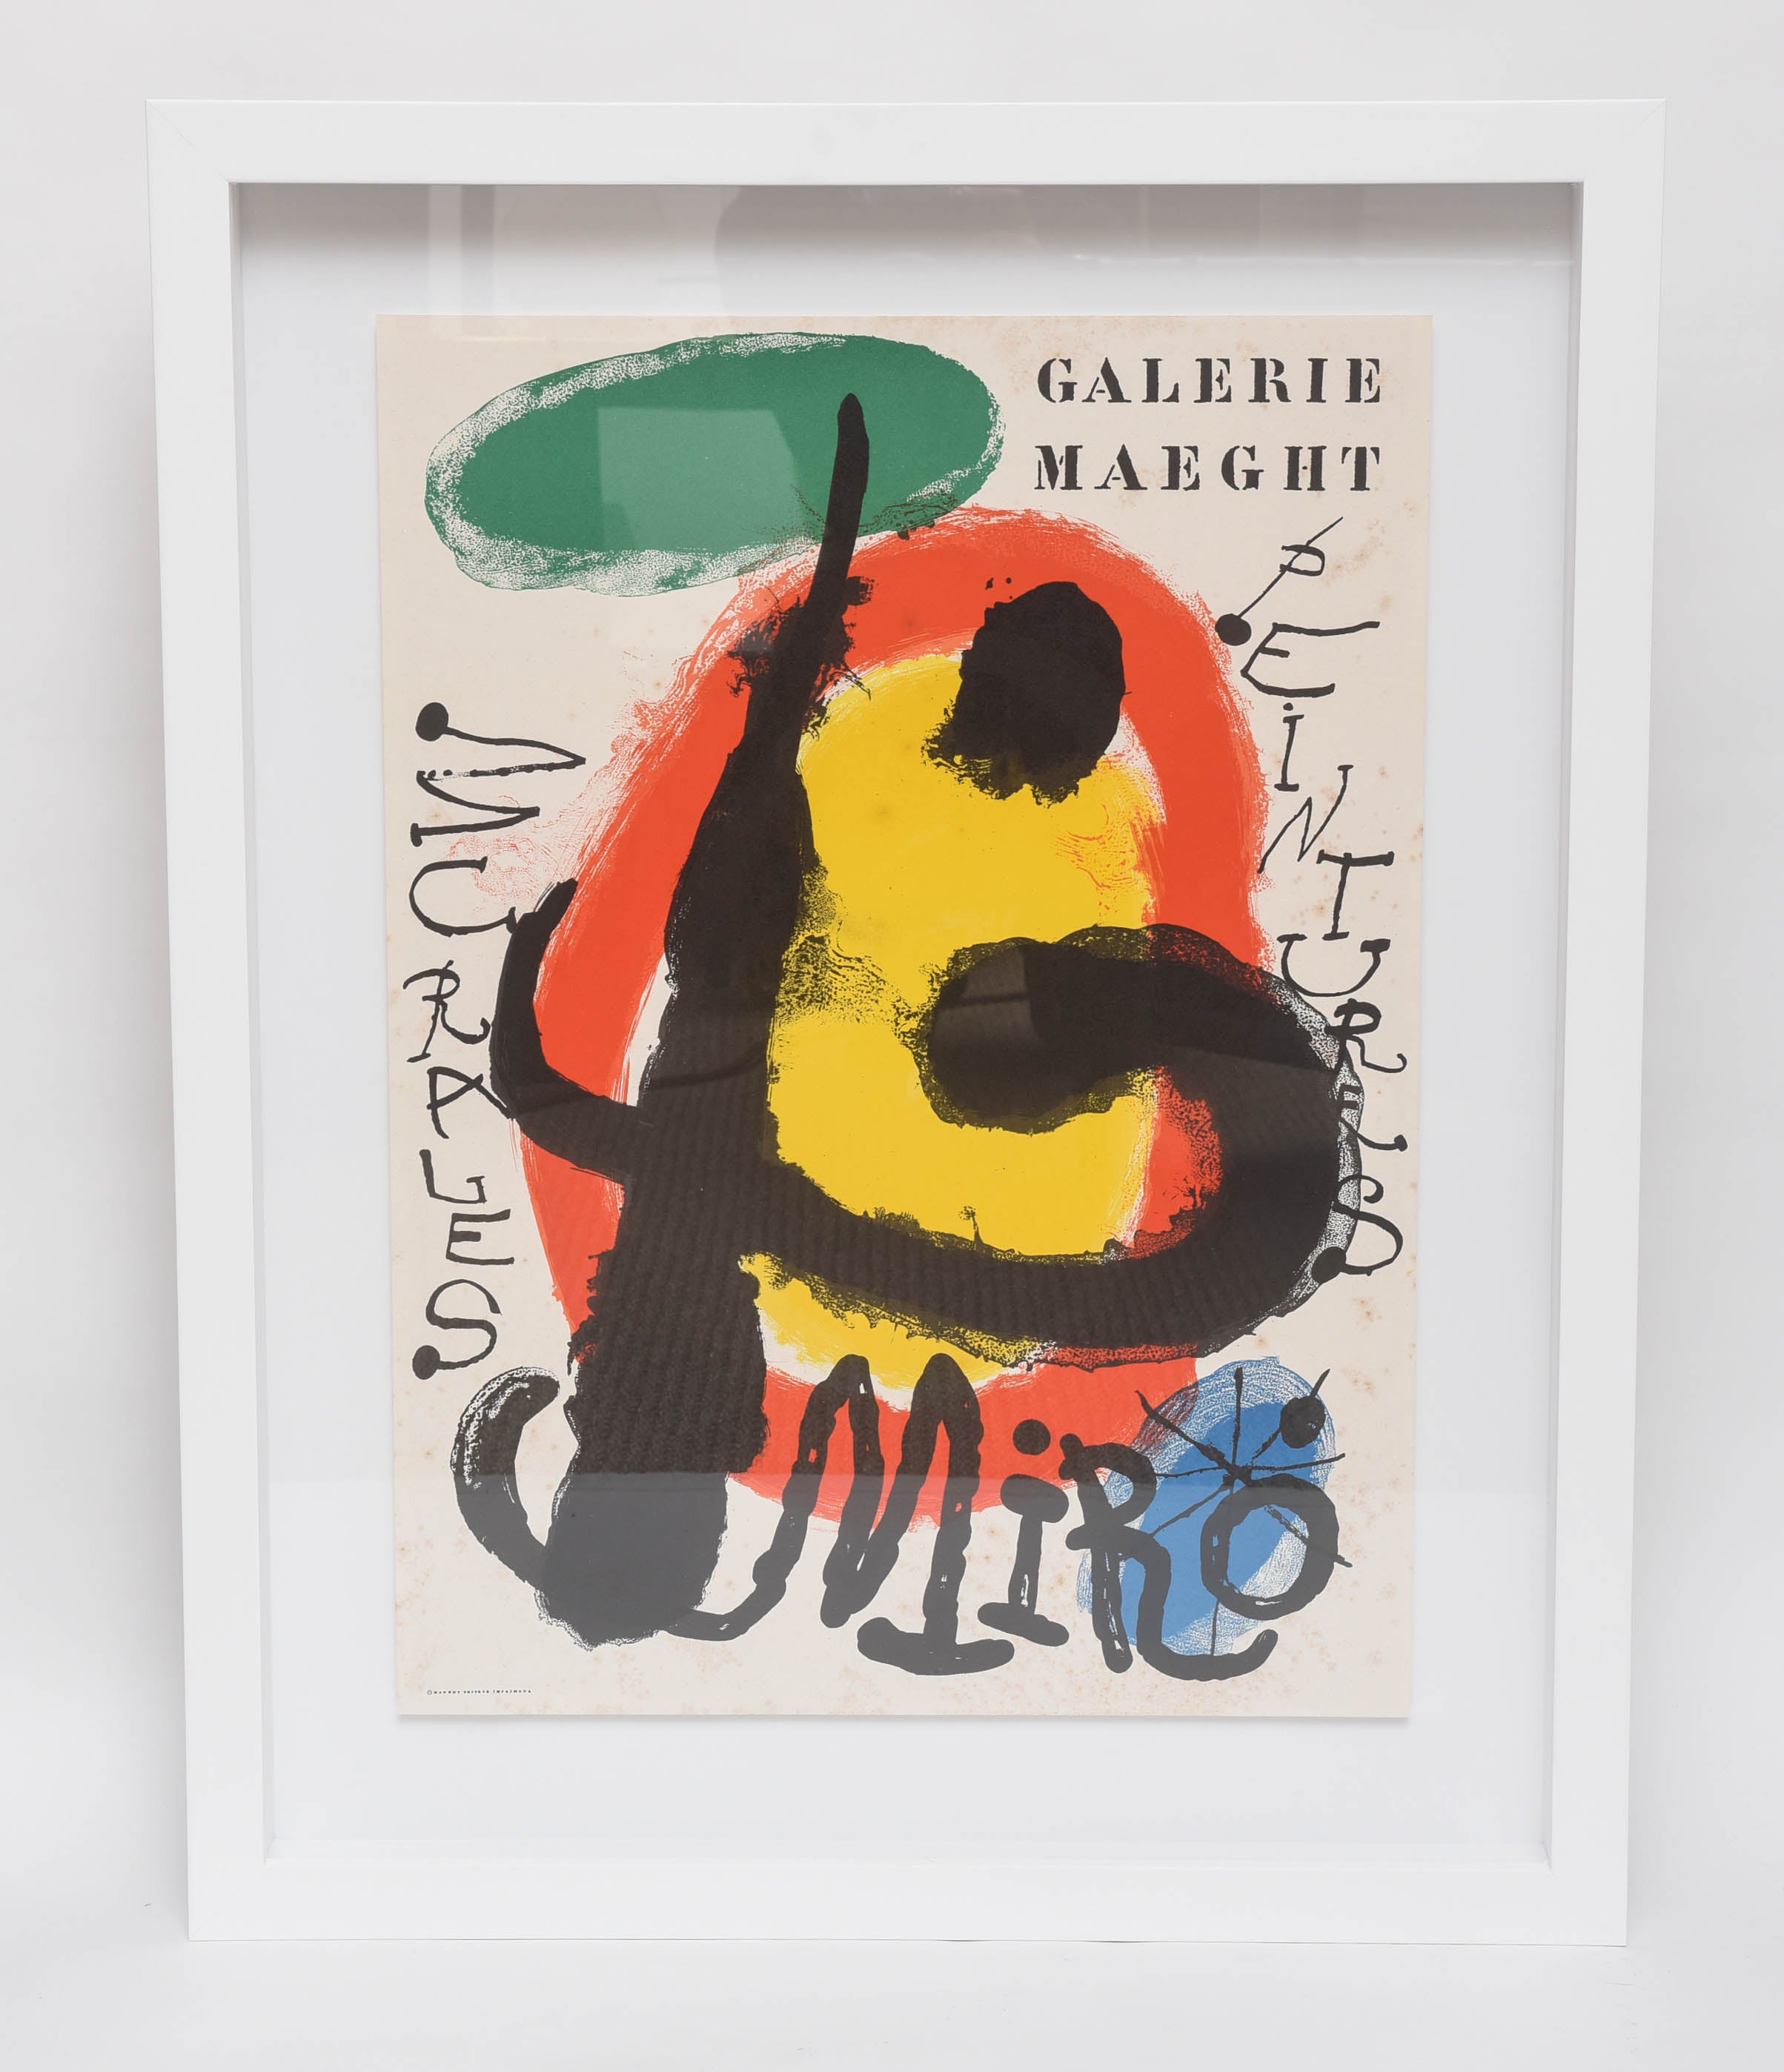 Vintage Exhibition Poster from Galerie Maeght for Joan Miro